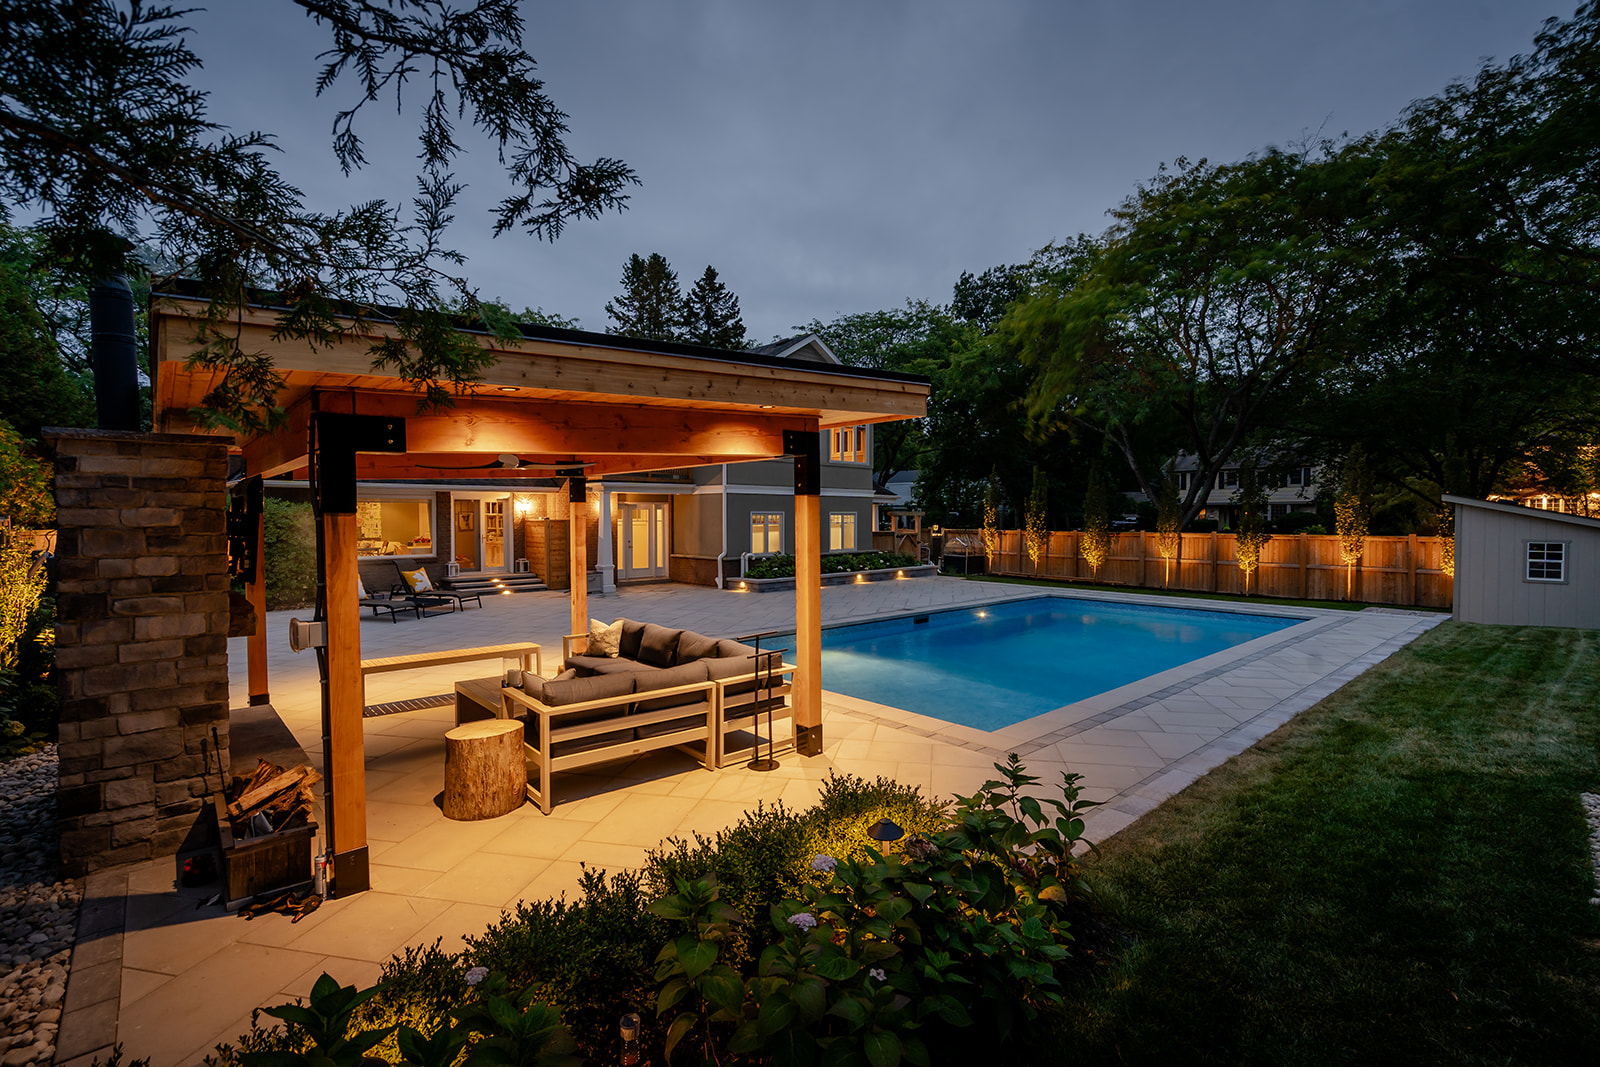 A gazebo with an outdoor patio underneath and the pool beside.